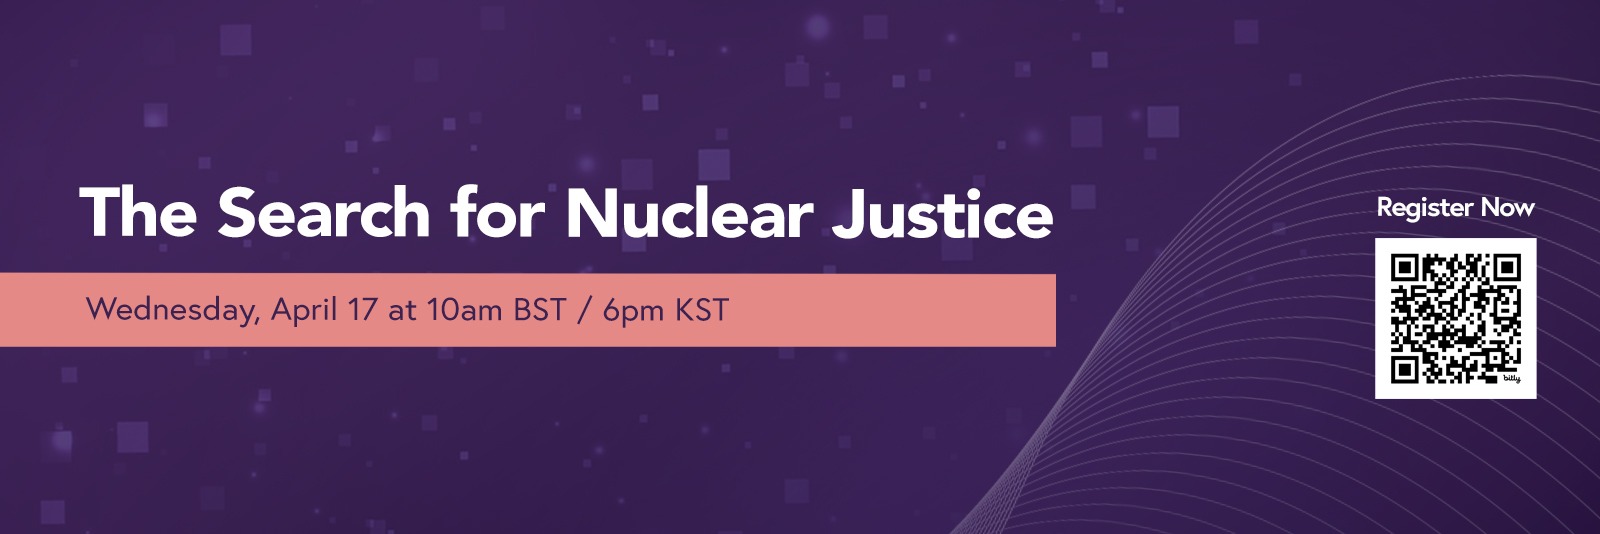 APLN-EVN Webinar: The Search for Nuclear Justice